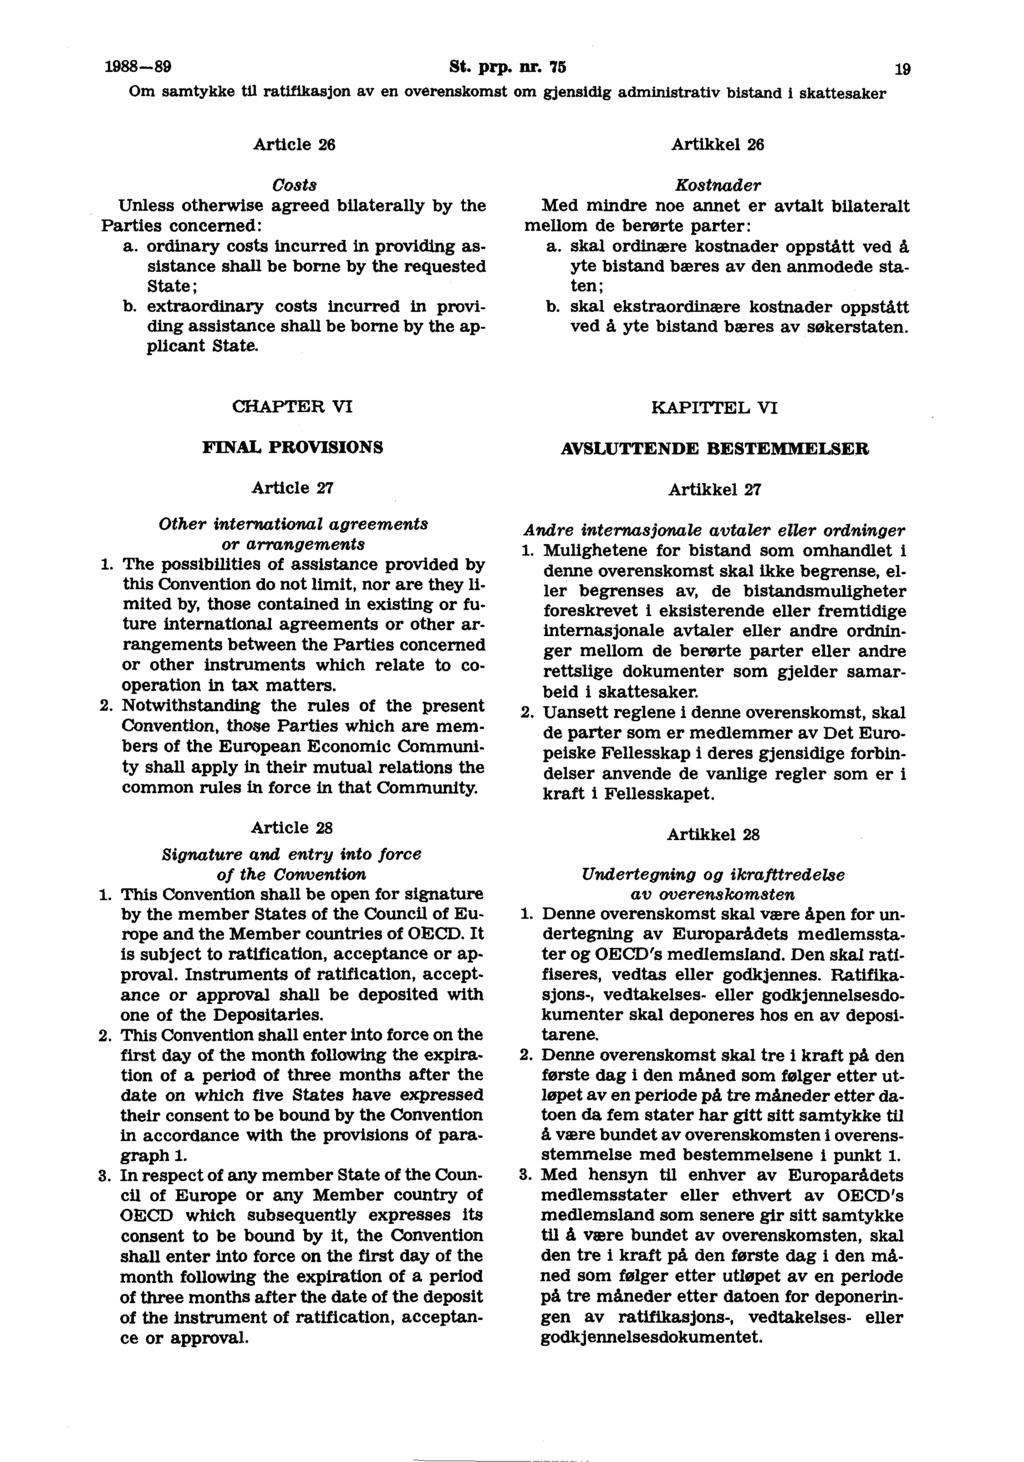 1988-89 St. prp. nr. 75 19 Article 26 Costs Unless otherwise agreed bilaterally by the Parties concerned: a. ordinary costs incurred in providing assistance shall be borne by the requested State ; b.